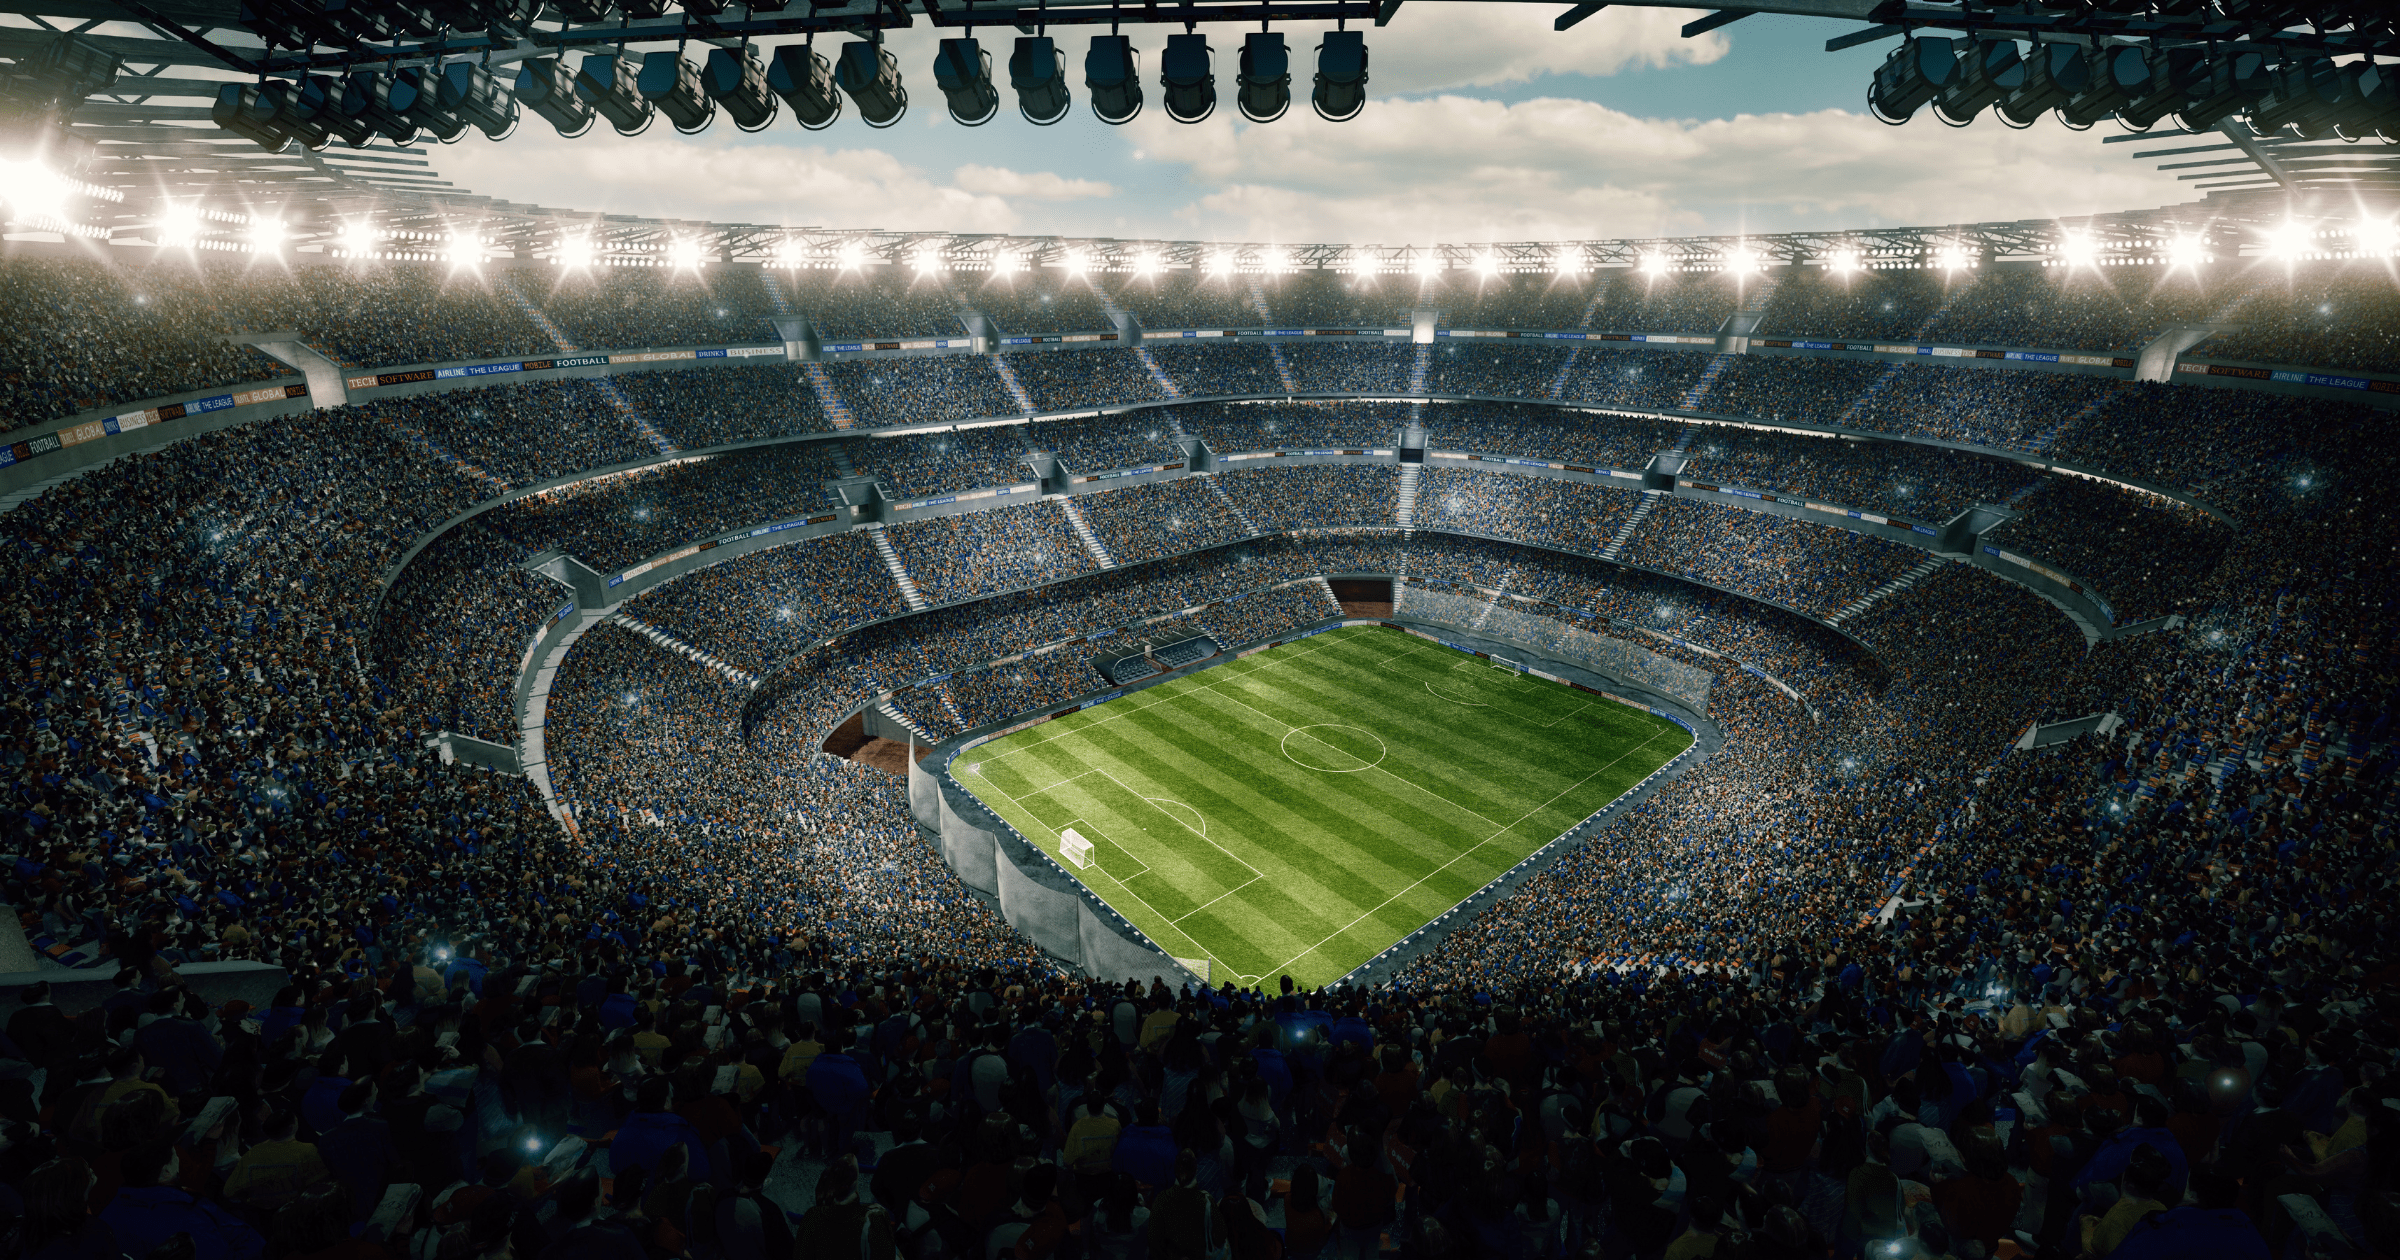 How to Design Wireless Network for Stadiums: Key Insights and Strategies